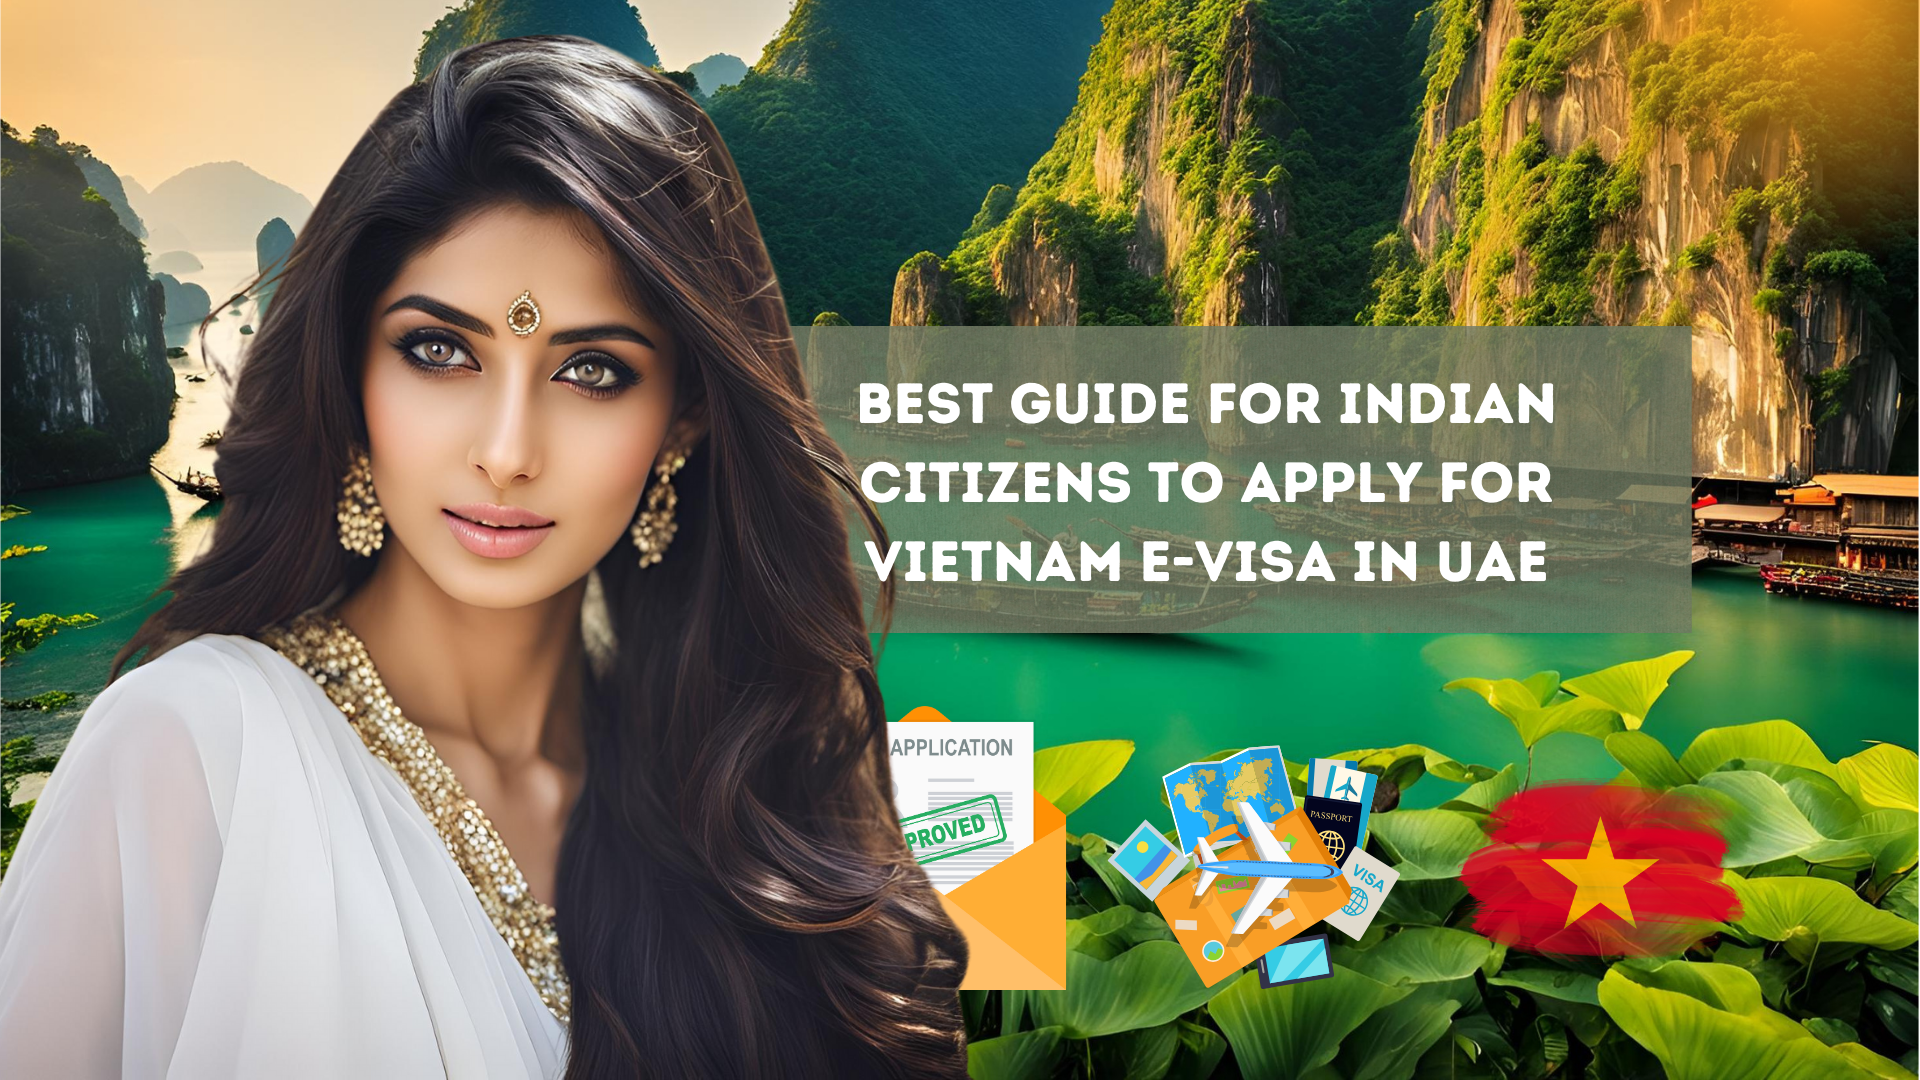 Best Guide for Indian Citizens to Apply for Vietnam E-Visa in UAE